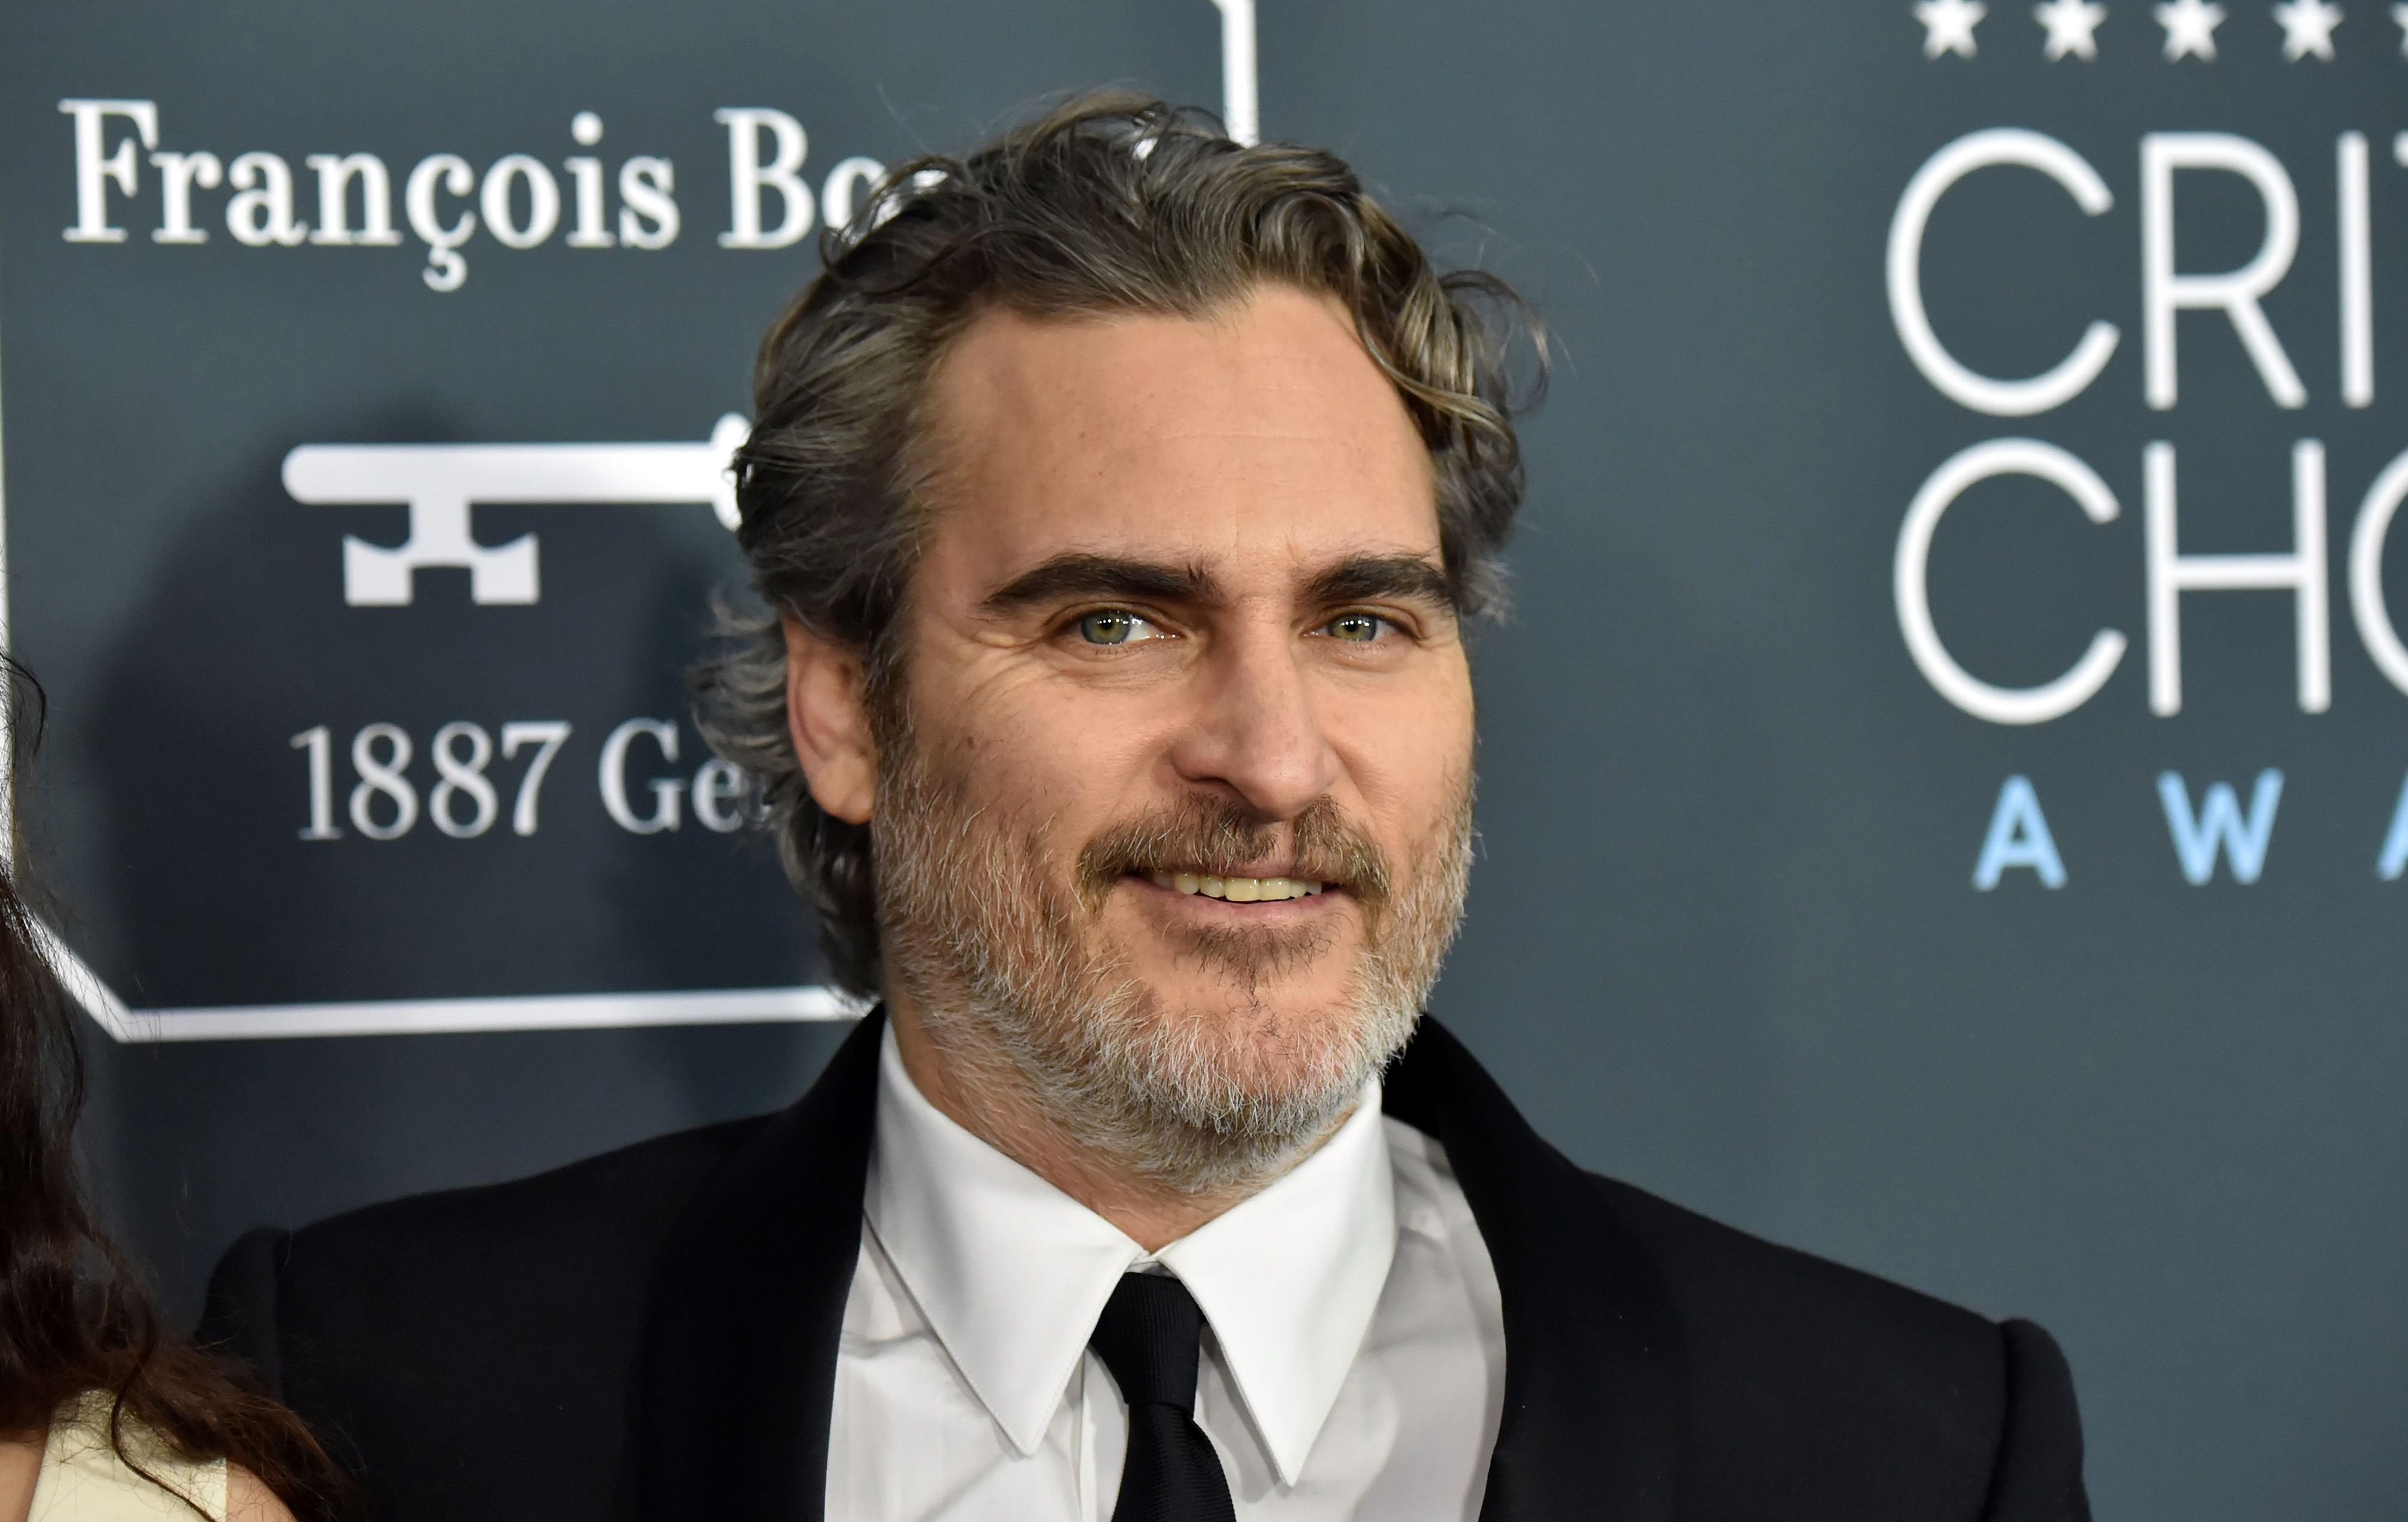 Joaquin Phoenix during the 25th Annual Critics' Choice Awards at Barker Hangar on January 12, 2020 in Santa Monica, California. | Source: Getty Images